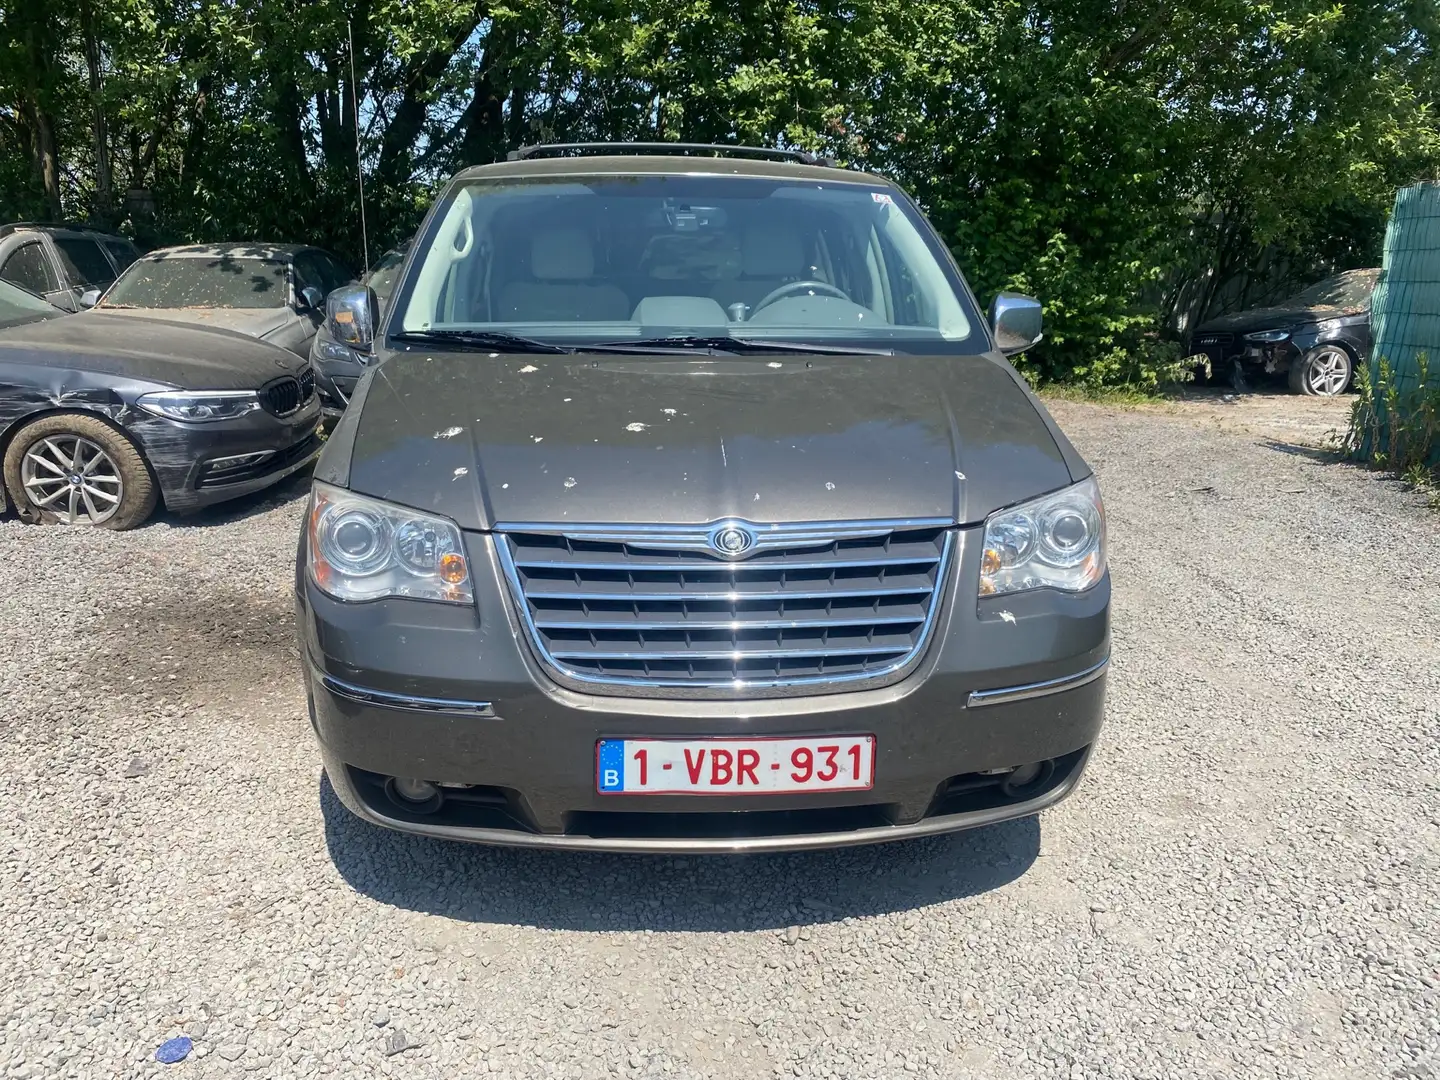 Chrysler Town & Country probleme moteur !!!! Brons - 1